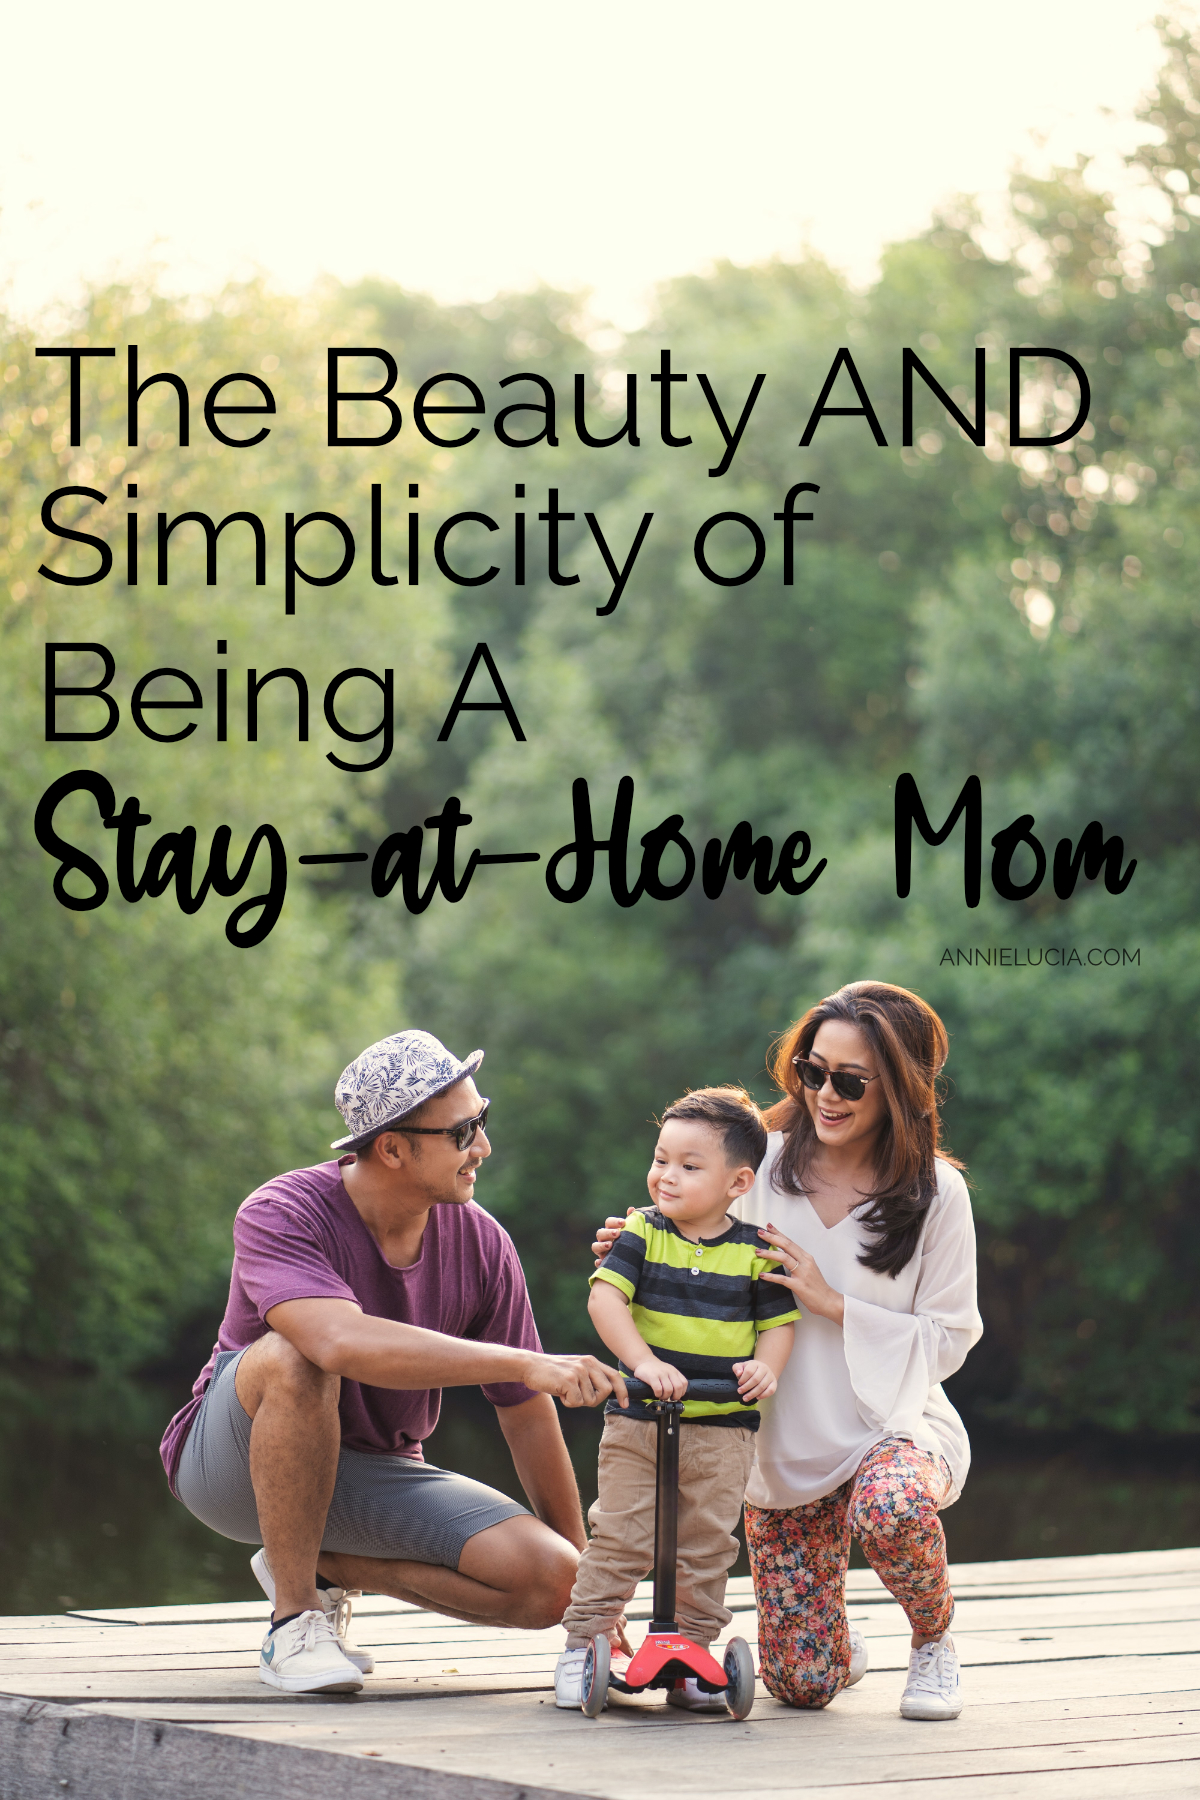 The Beauty AND Simplicity of Being A Stay-at-Home Mom